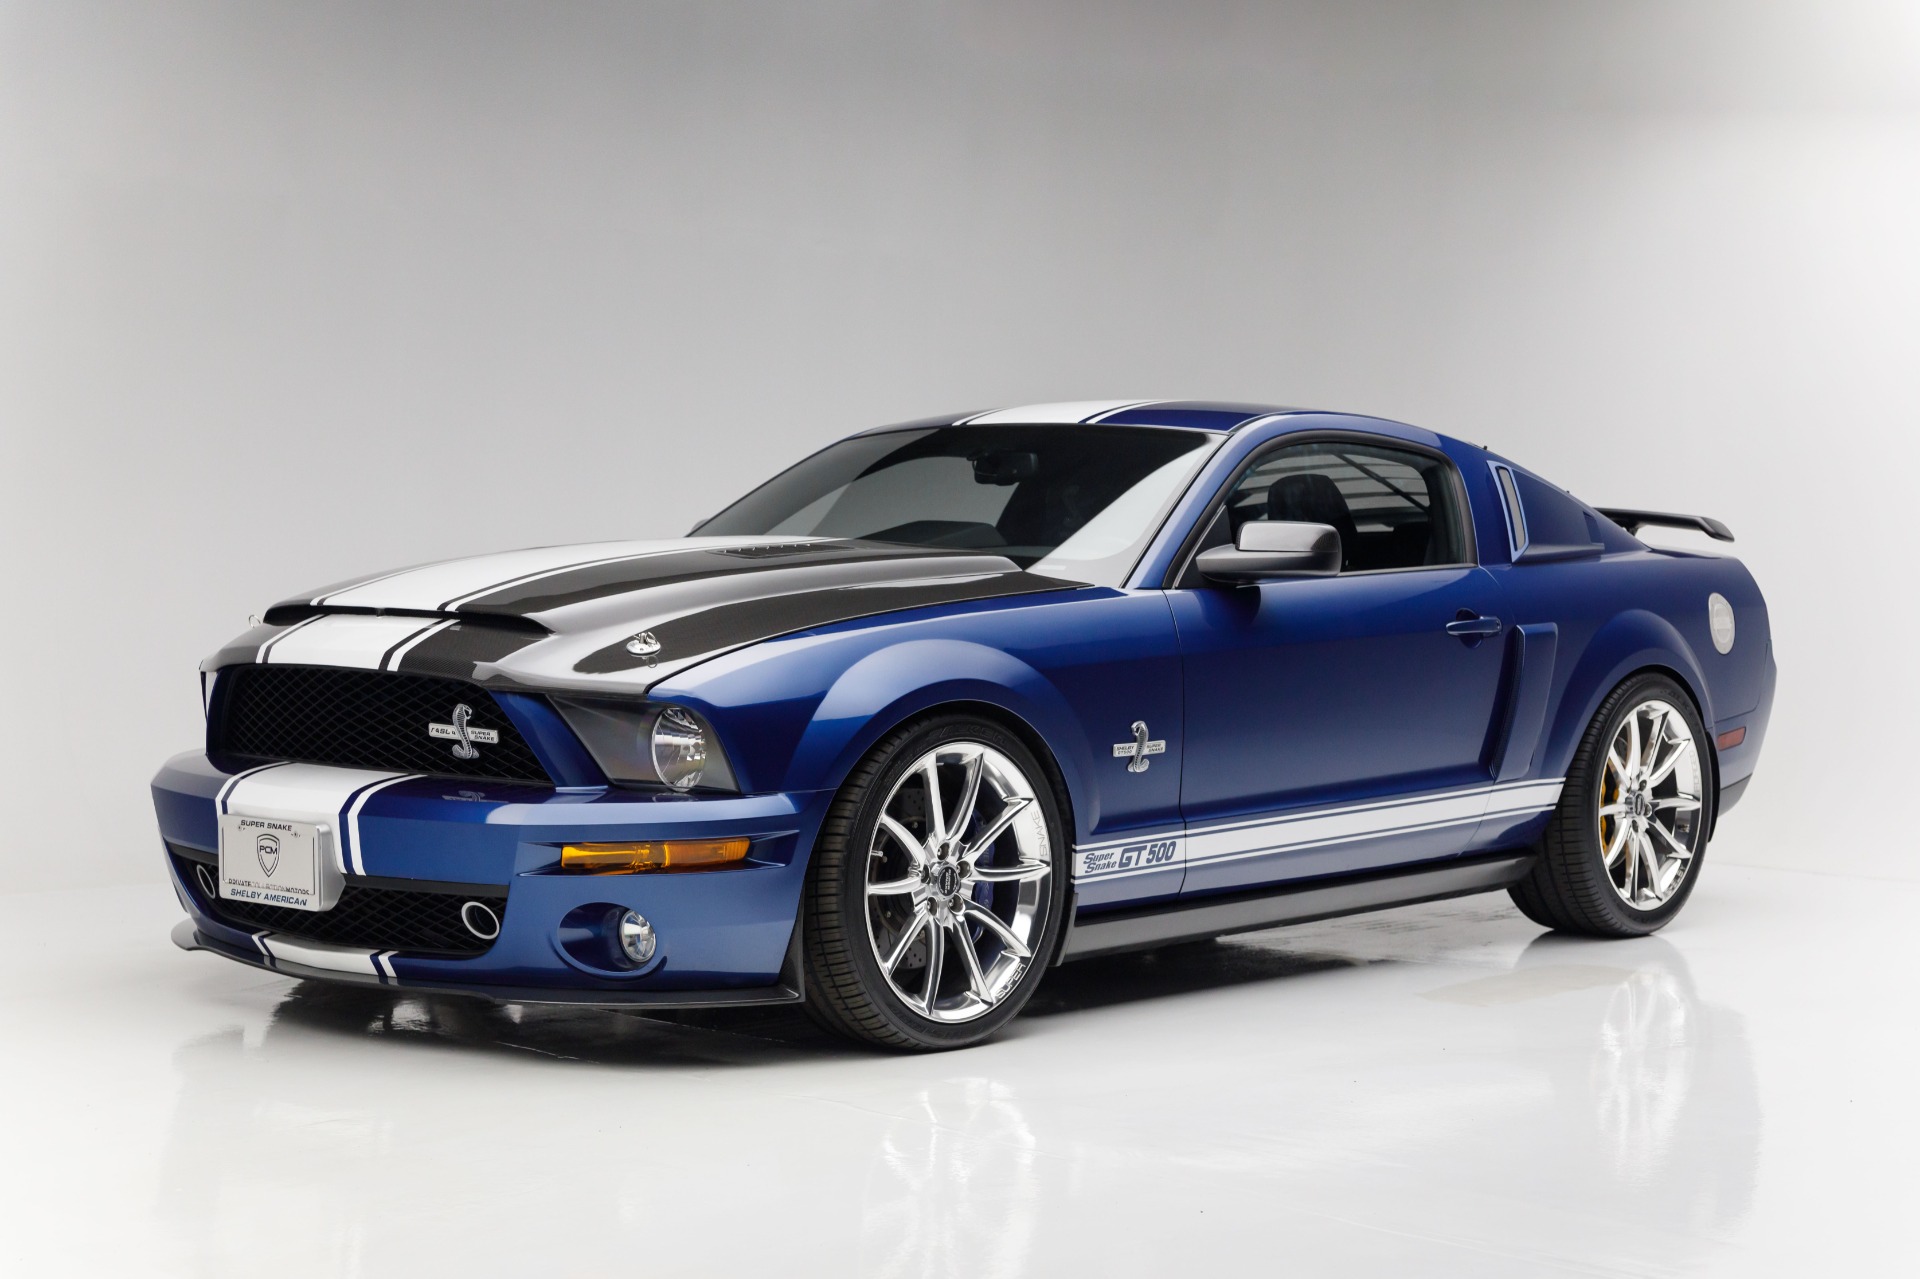 Pre-Owned 2009 Ford Mustang Shelby GT500 Super Snake 2dr Car in Sherwood  Park #SMC0026A